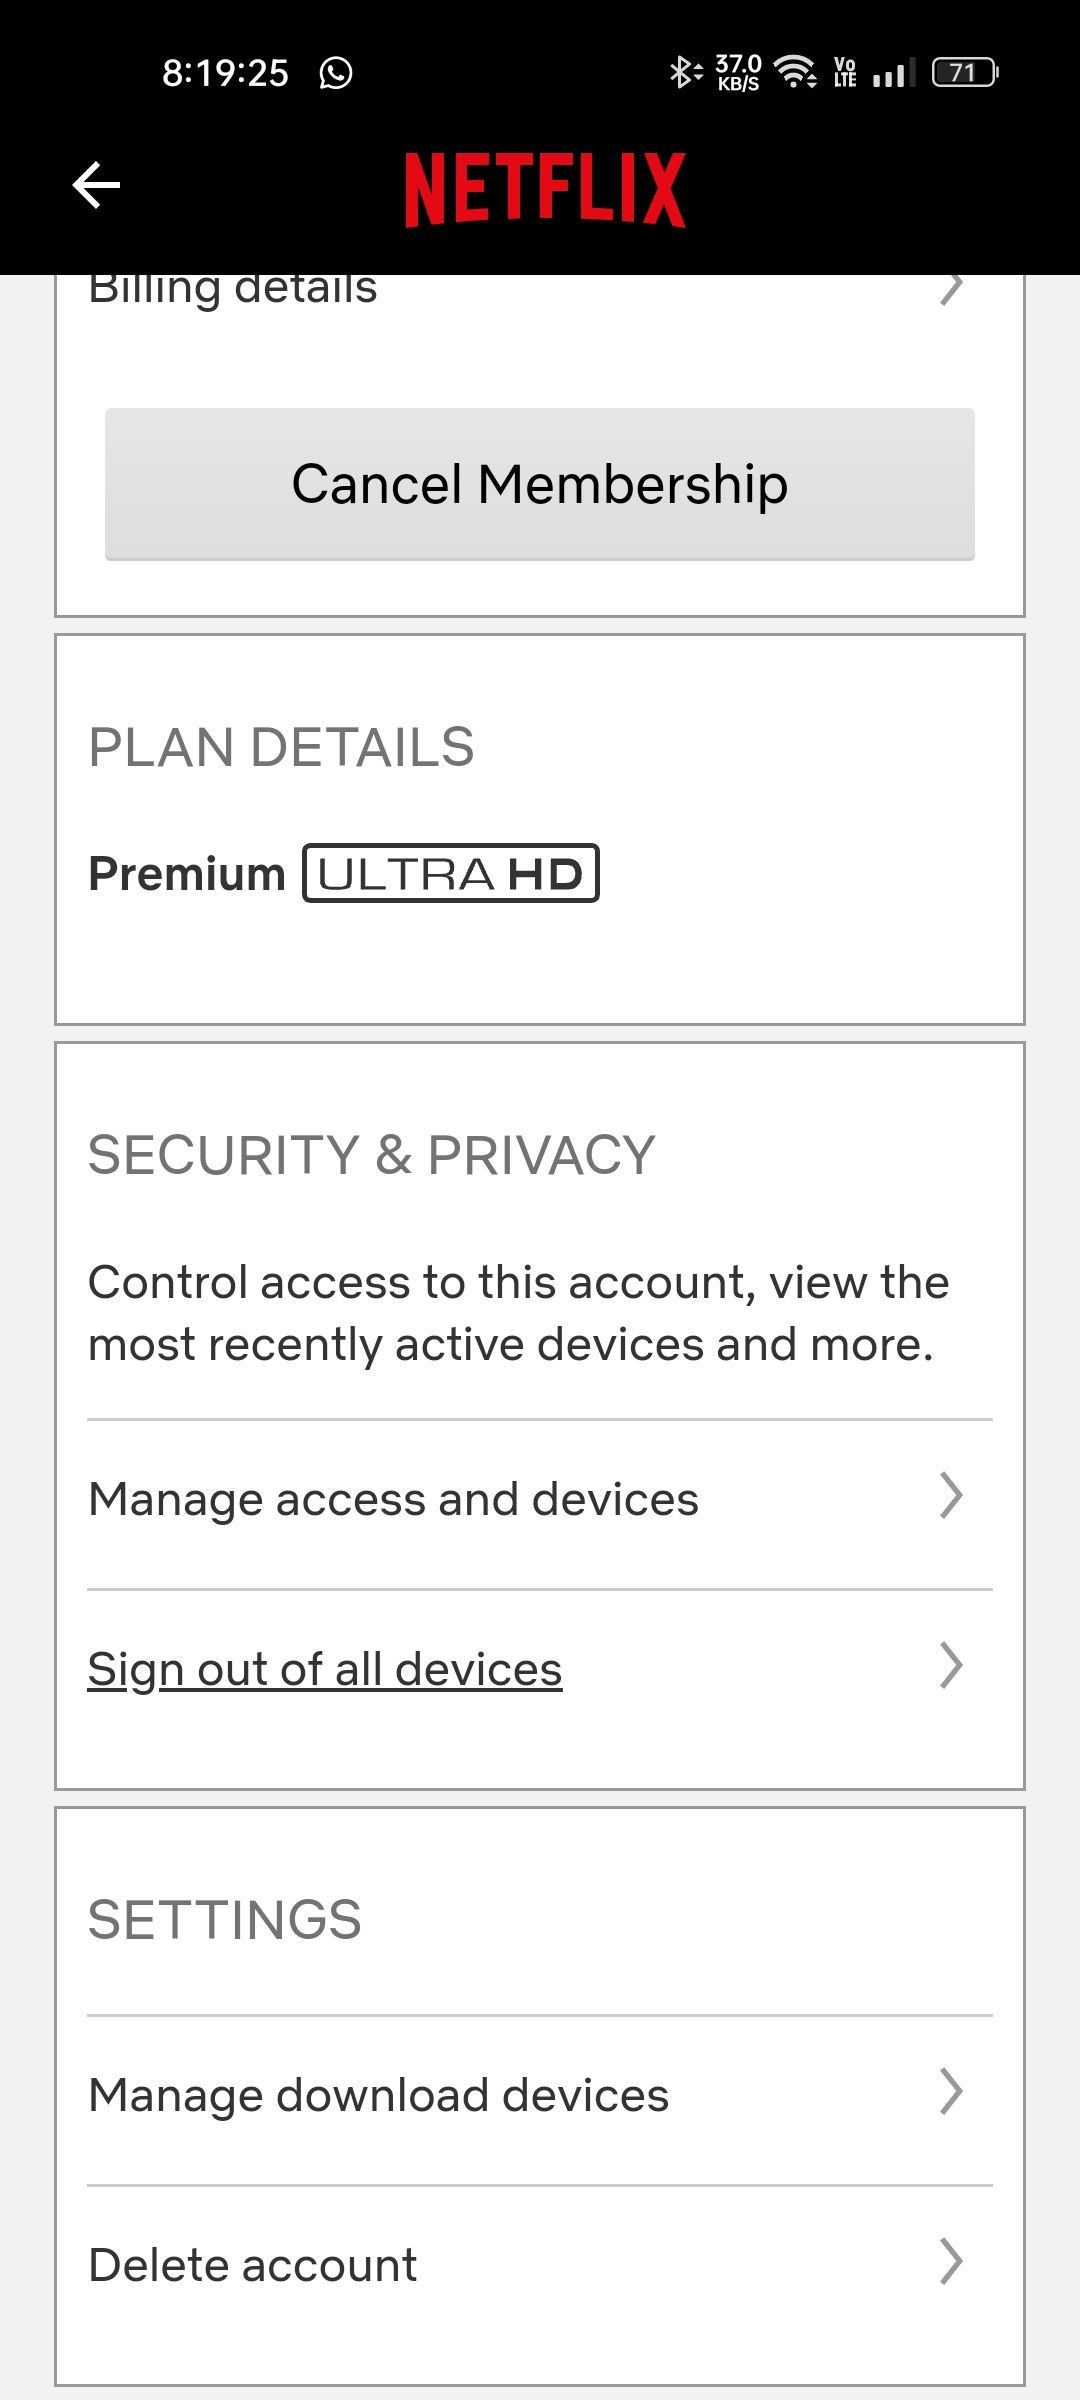 Netflix manage access and devices